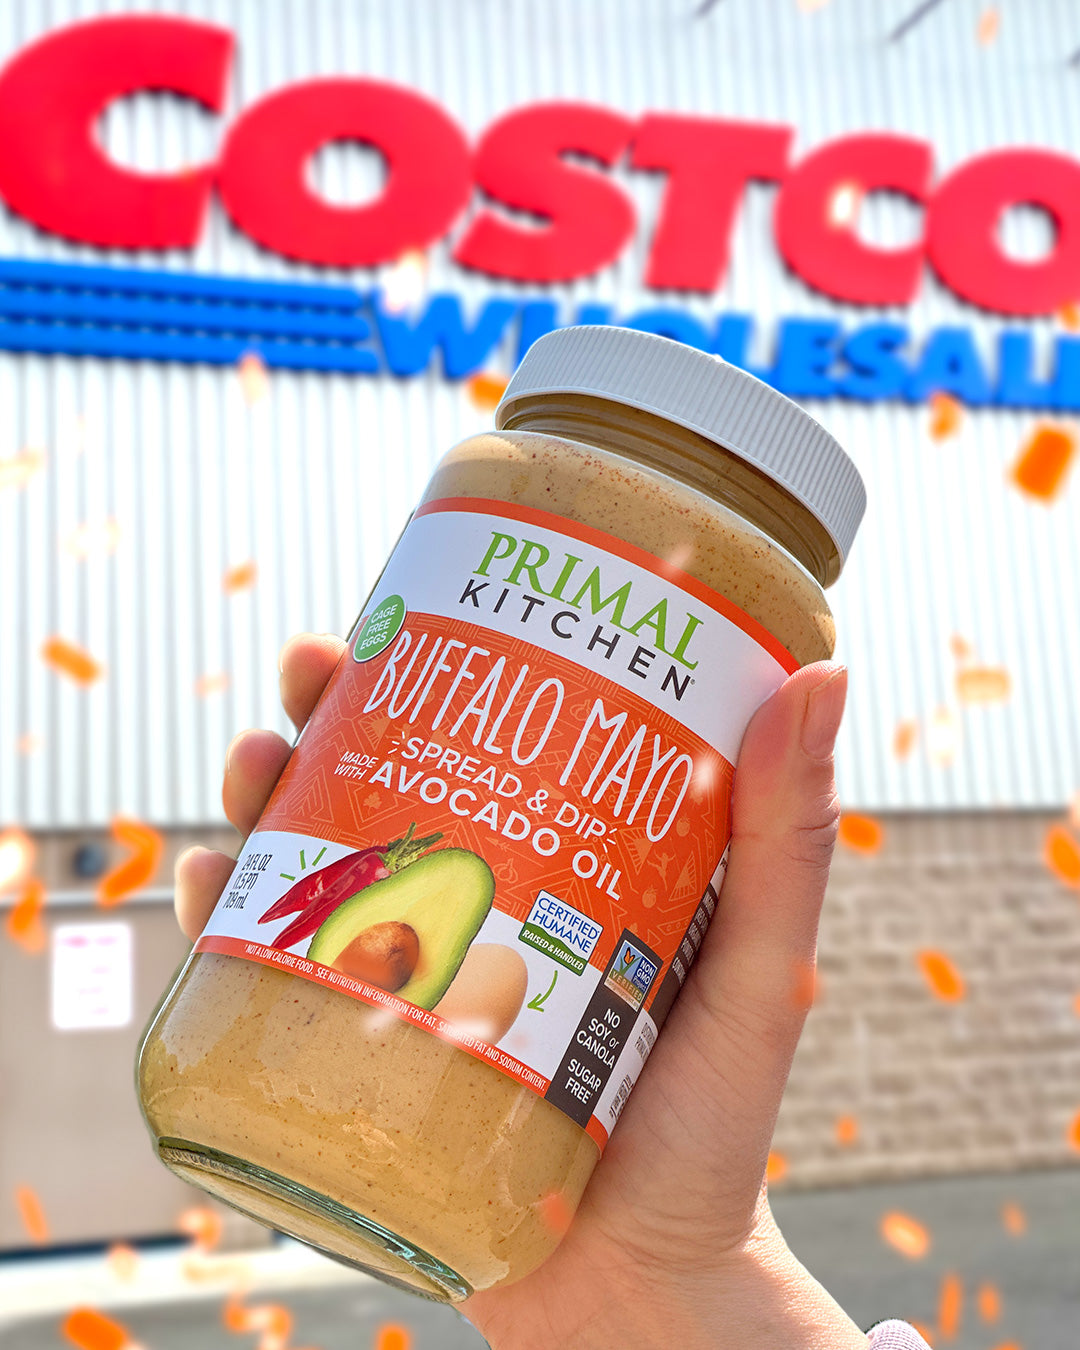 Primal Kitchen Buffalo Mayo Costco Sweepstakes Official Terms and Conditions